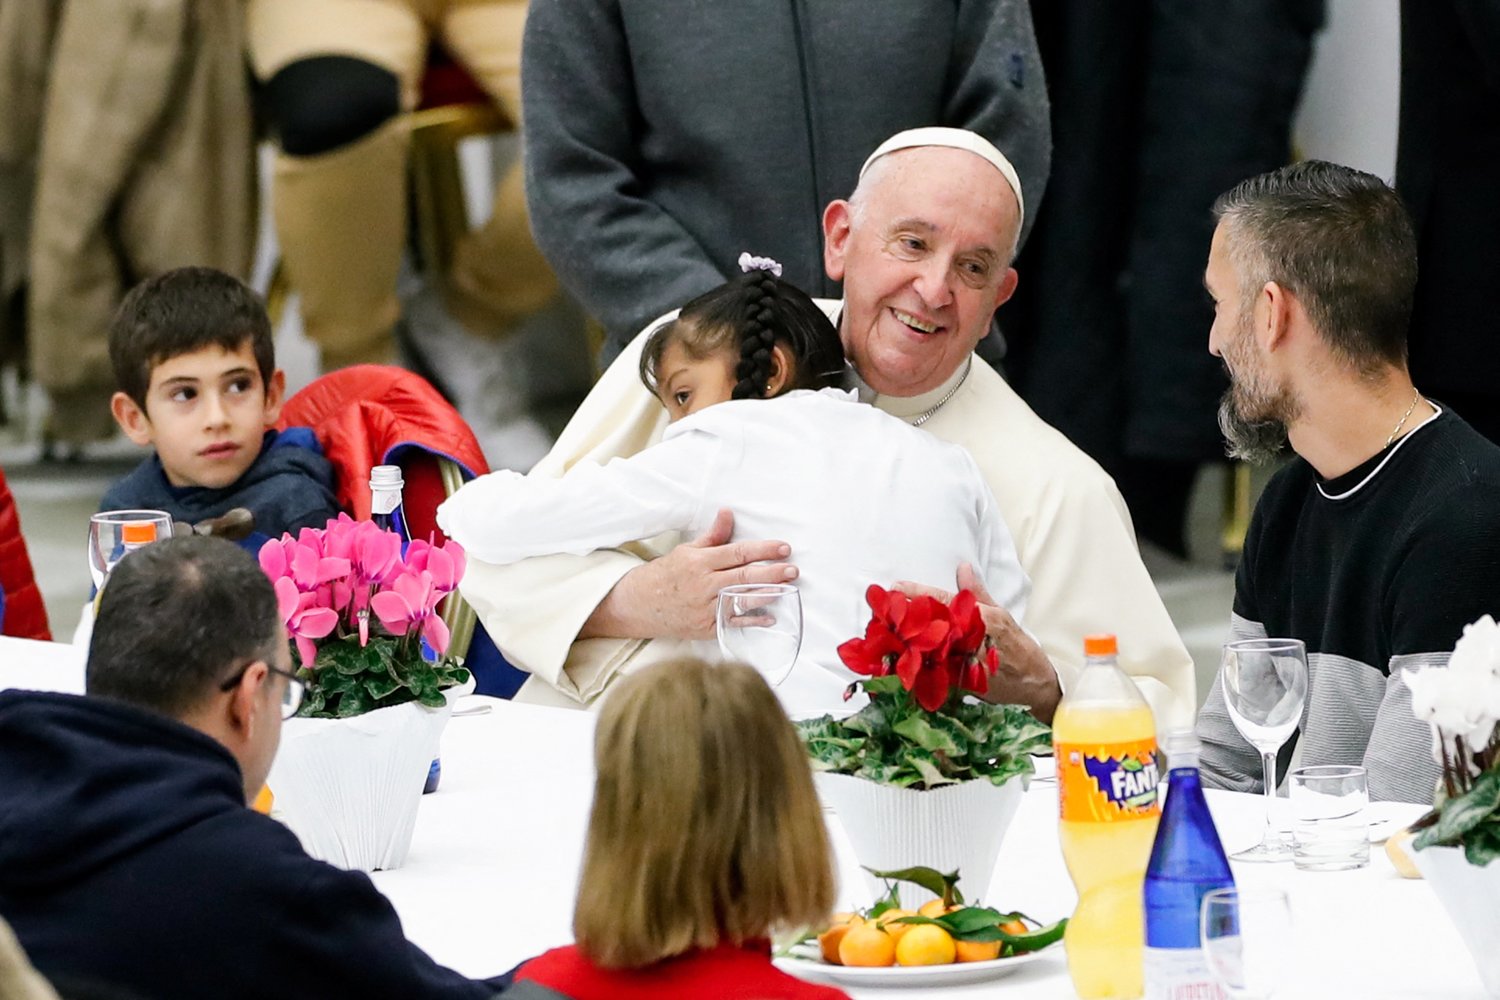 Pope Francis joins some 1,300 guests for lunch in the Vatican audience hall on the World Day of the Poor Nov. 13.